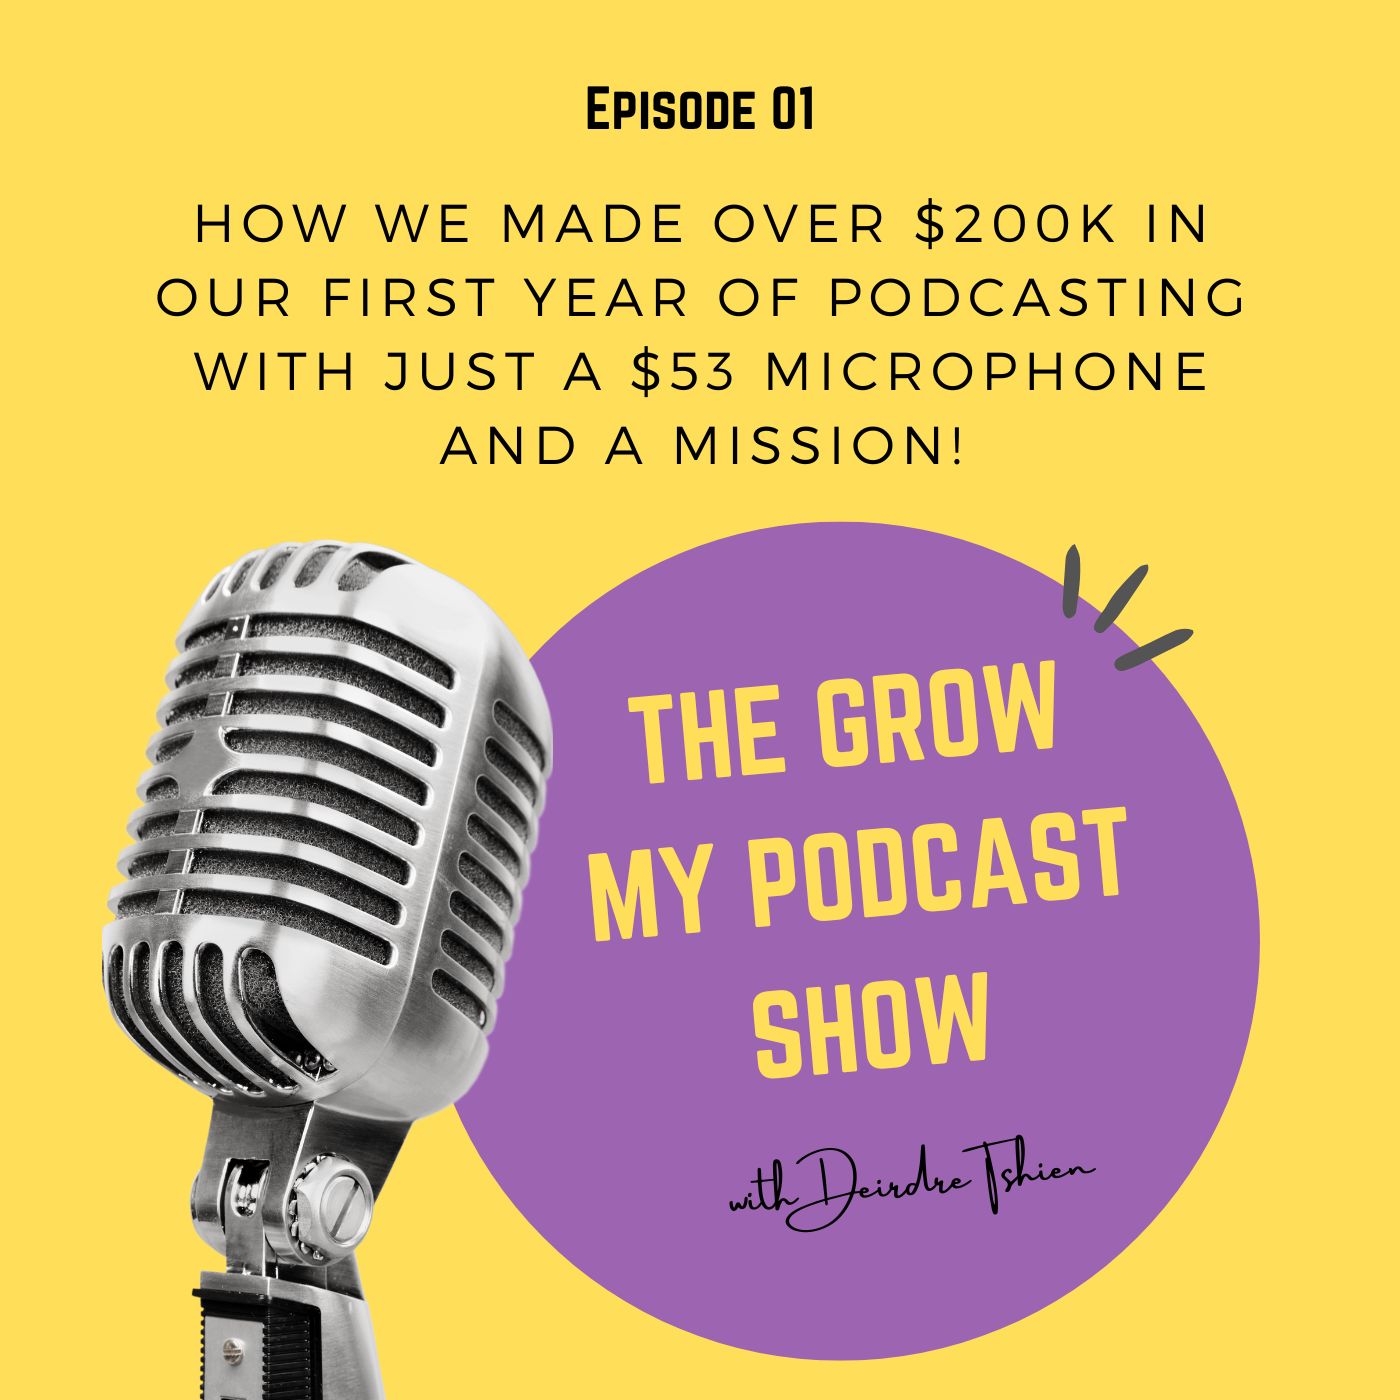 Episode image for 1. How we made over $200k in our first year of podcasting!